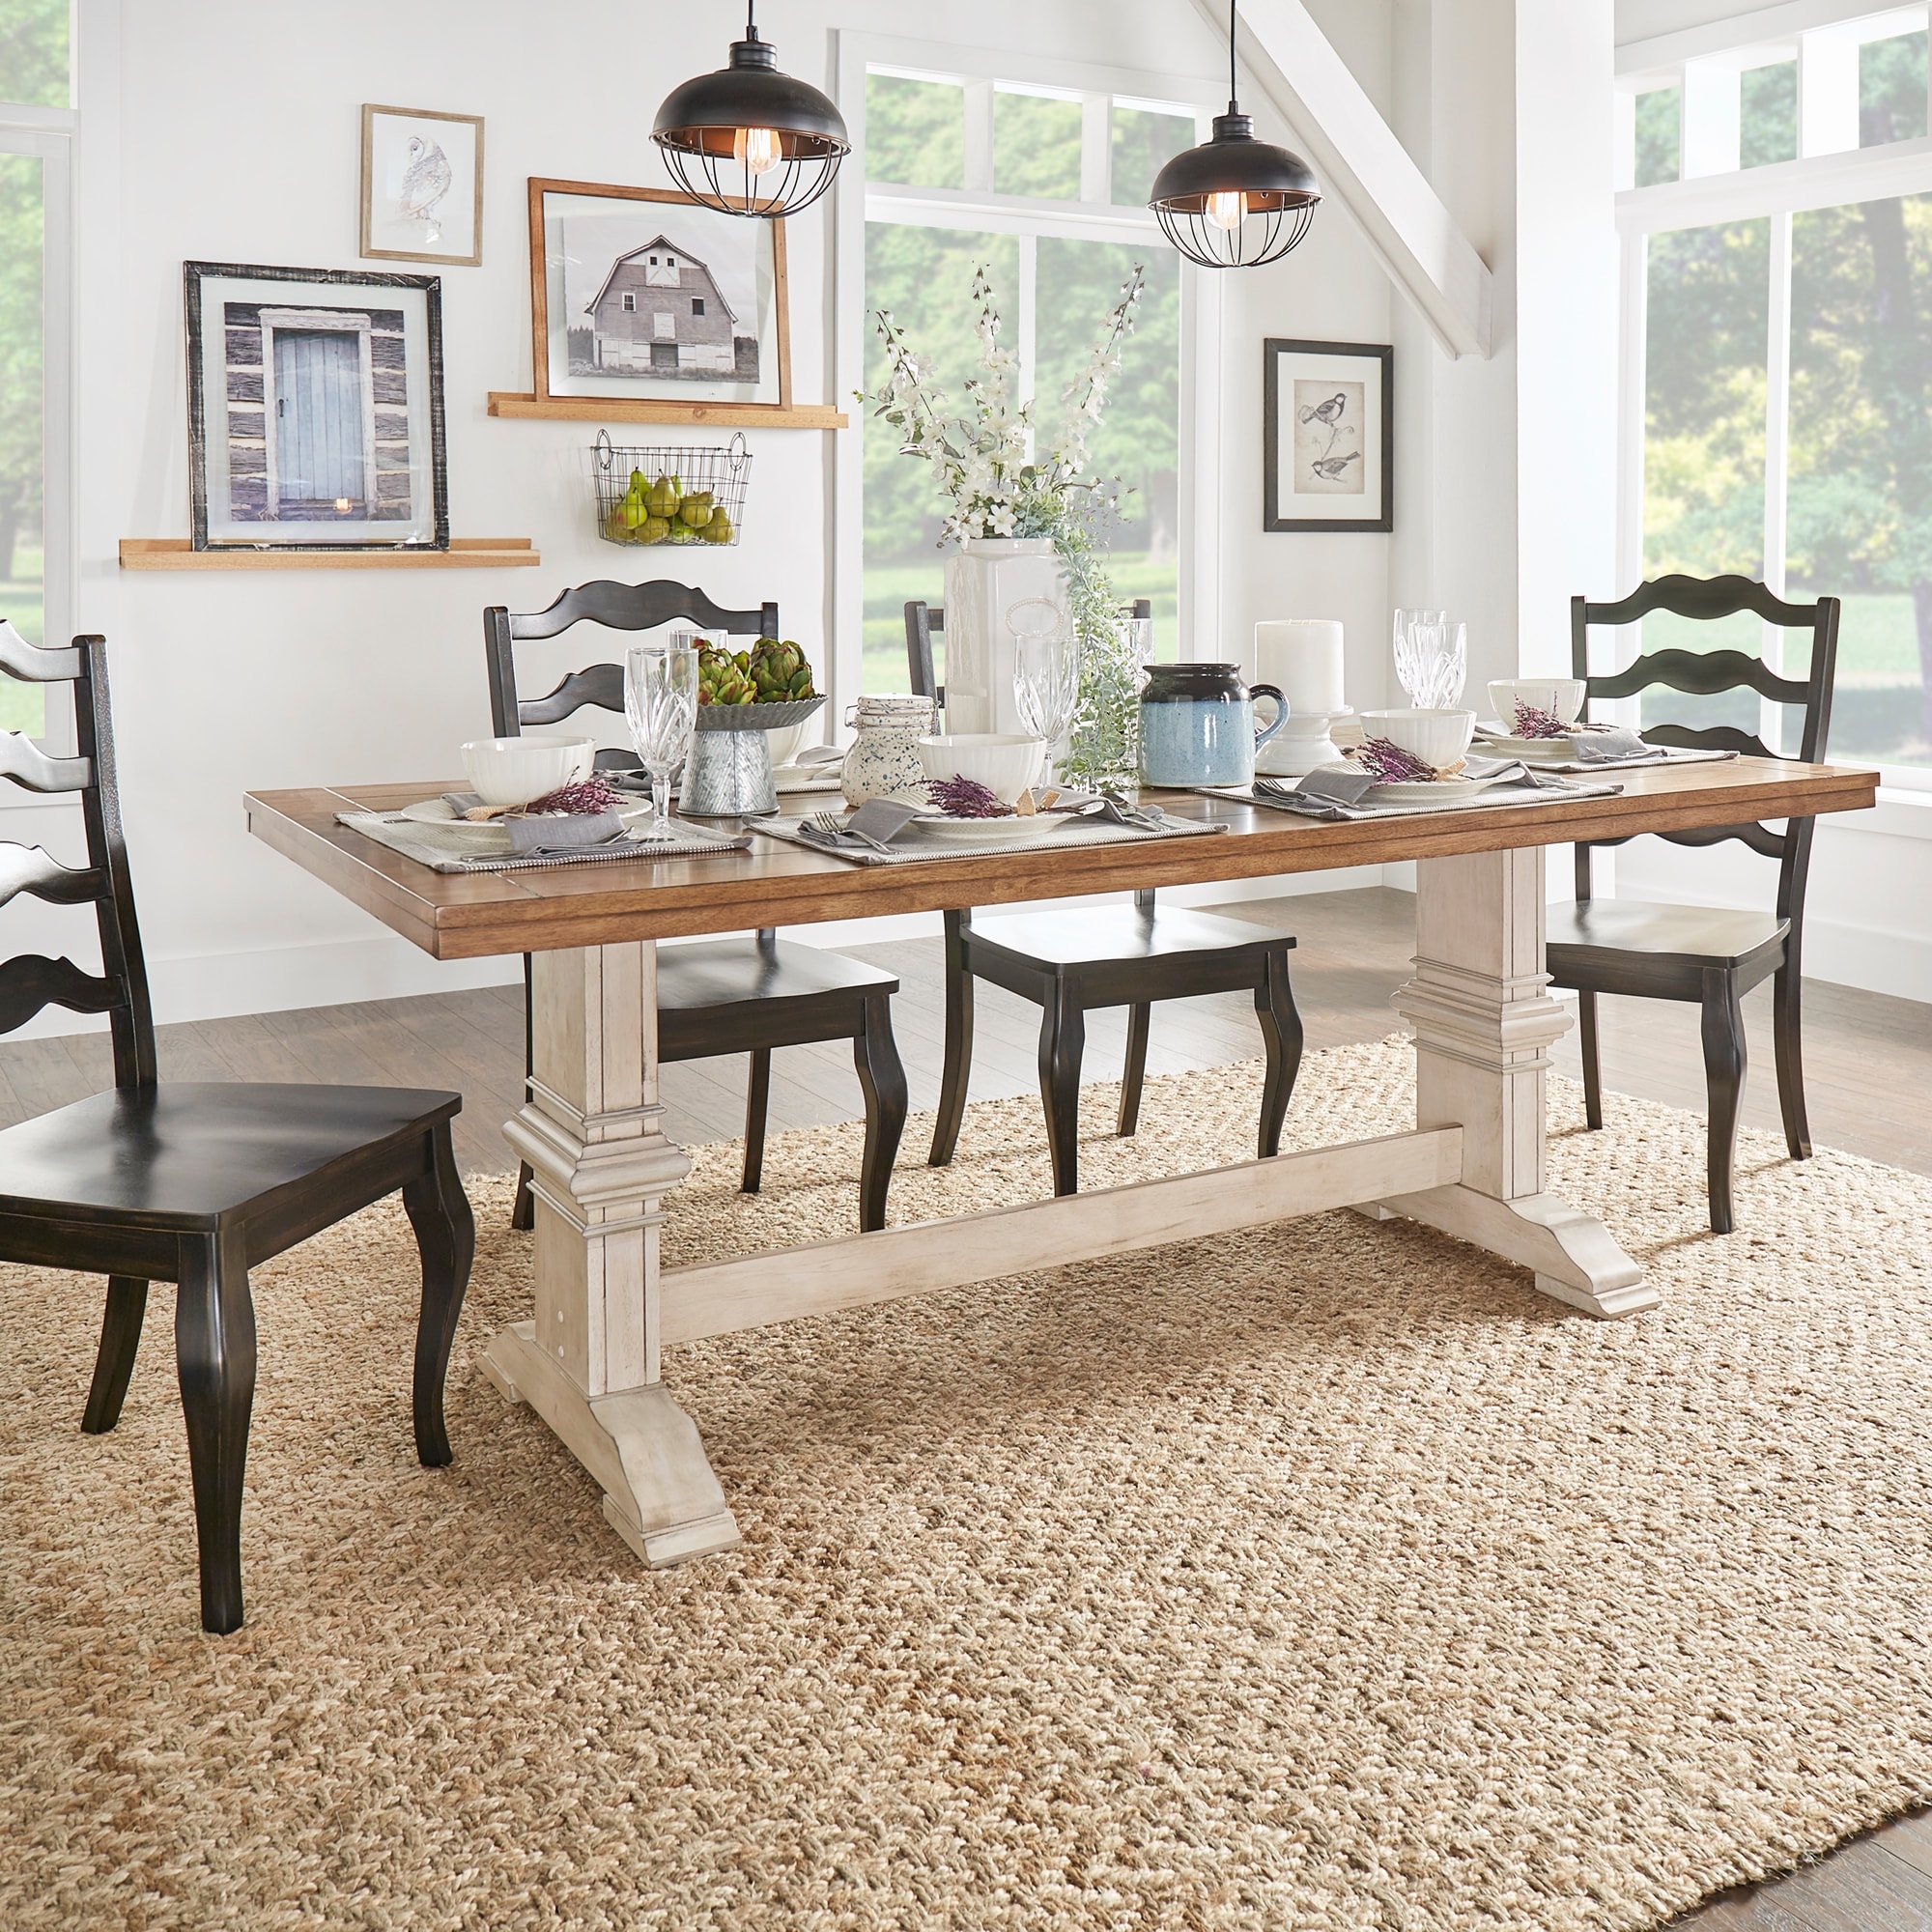 https://ak1.ostkcdn.com/images/products/is/images/direct/300725a286591f26646978b289d4aa58f51bd2c5/Eleanor-Two-tone-Solid-Wood-Top-Dining-Table-by-iNSPIRE-Q-Classic.jpg